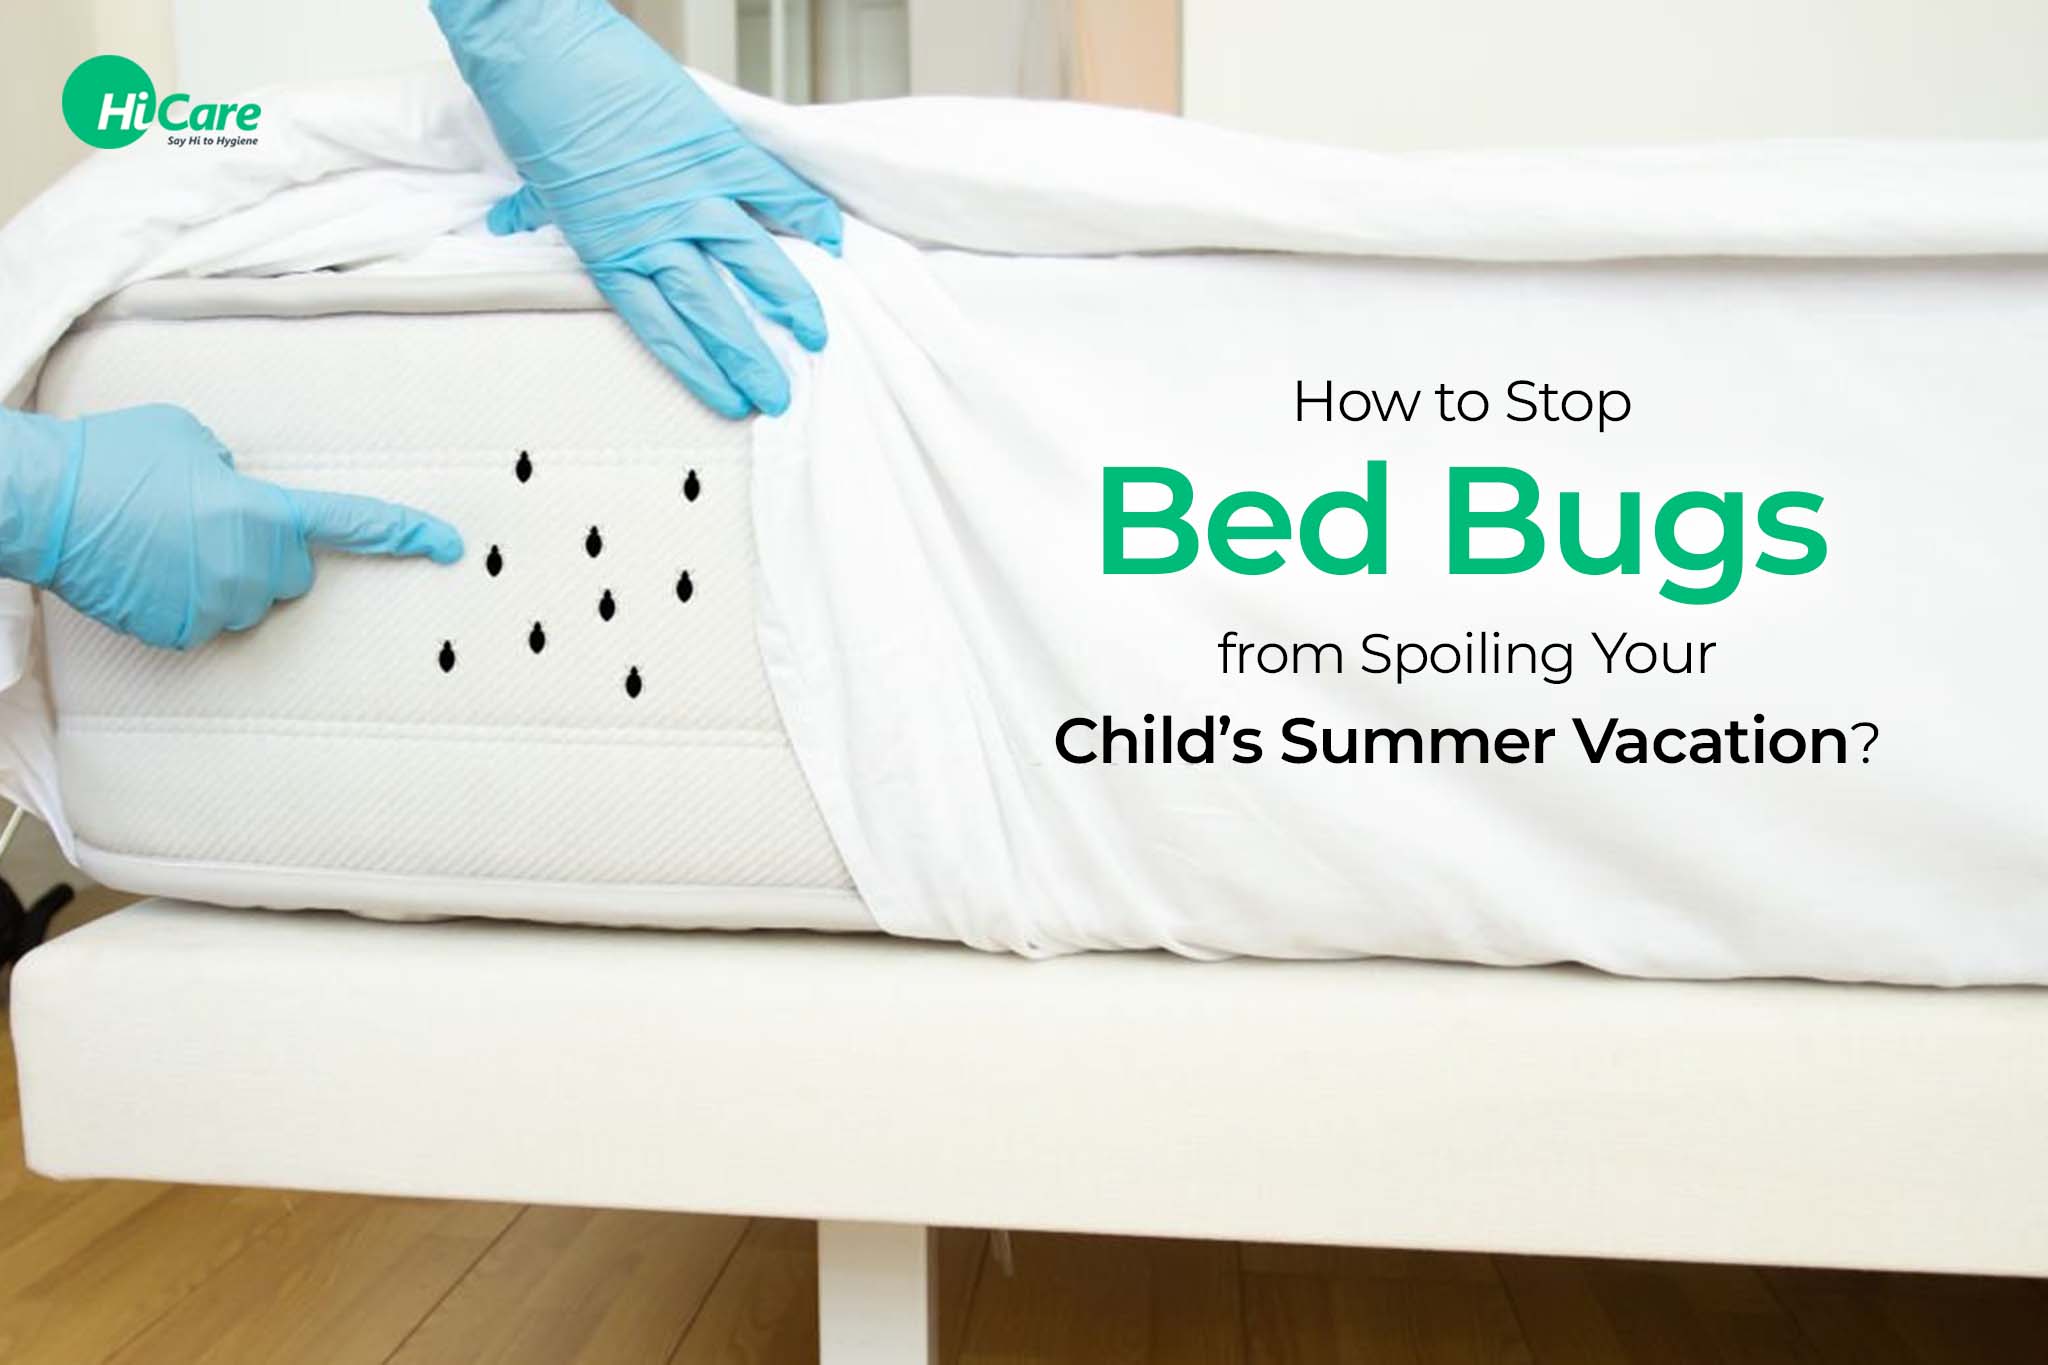 How to Stop Bed Bugs from Spoiling Your Child’s Summer Vacation?